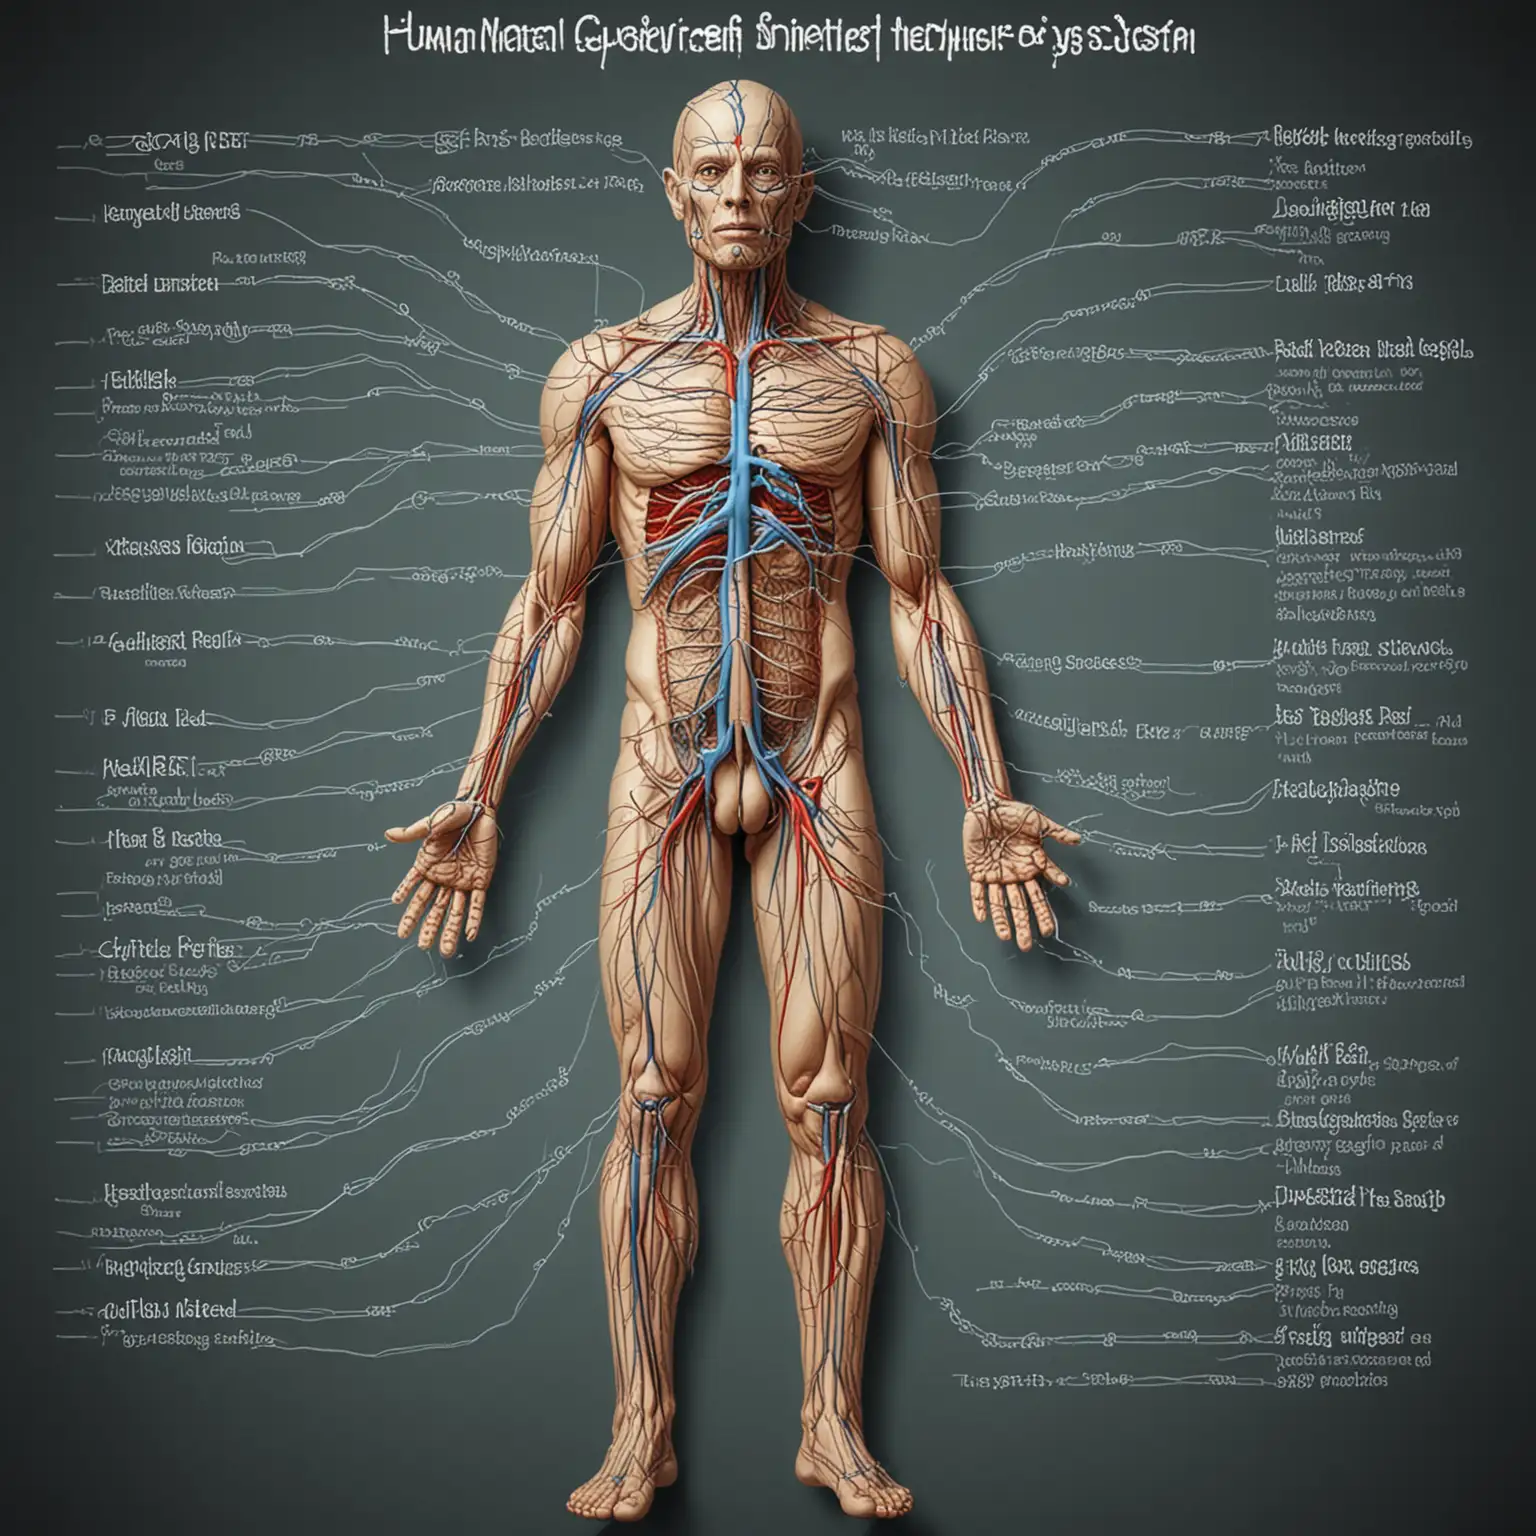 realistic and biologically accurate simple diagram of the Human peripheral nervous system using English word descriptions